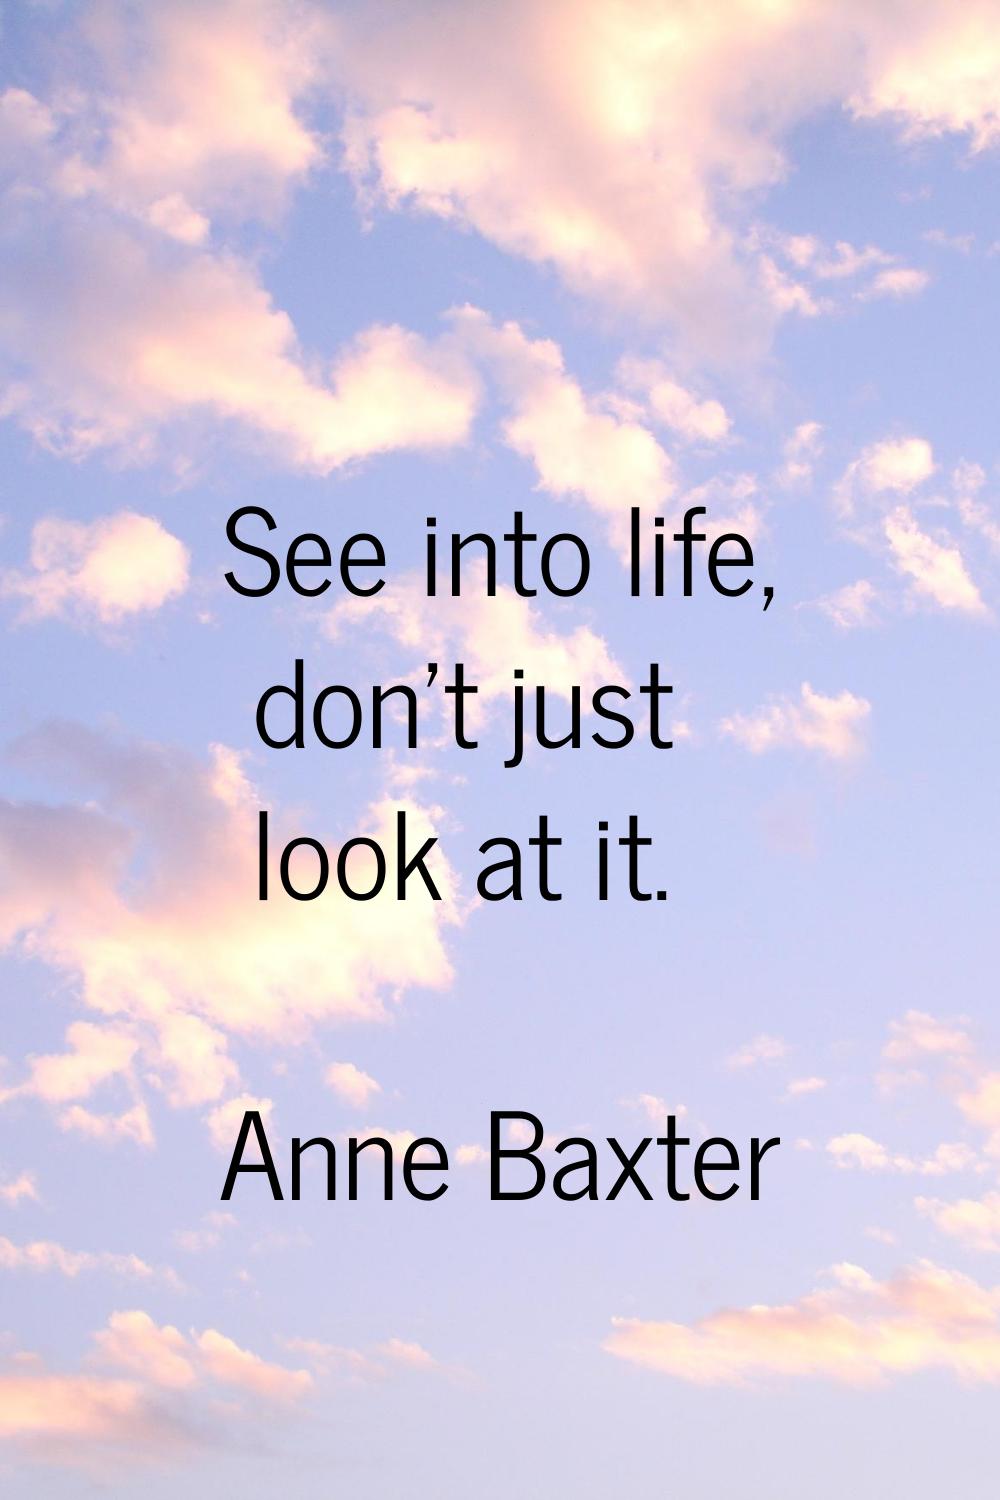 See into life, don't just look at it.